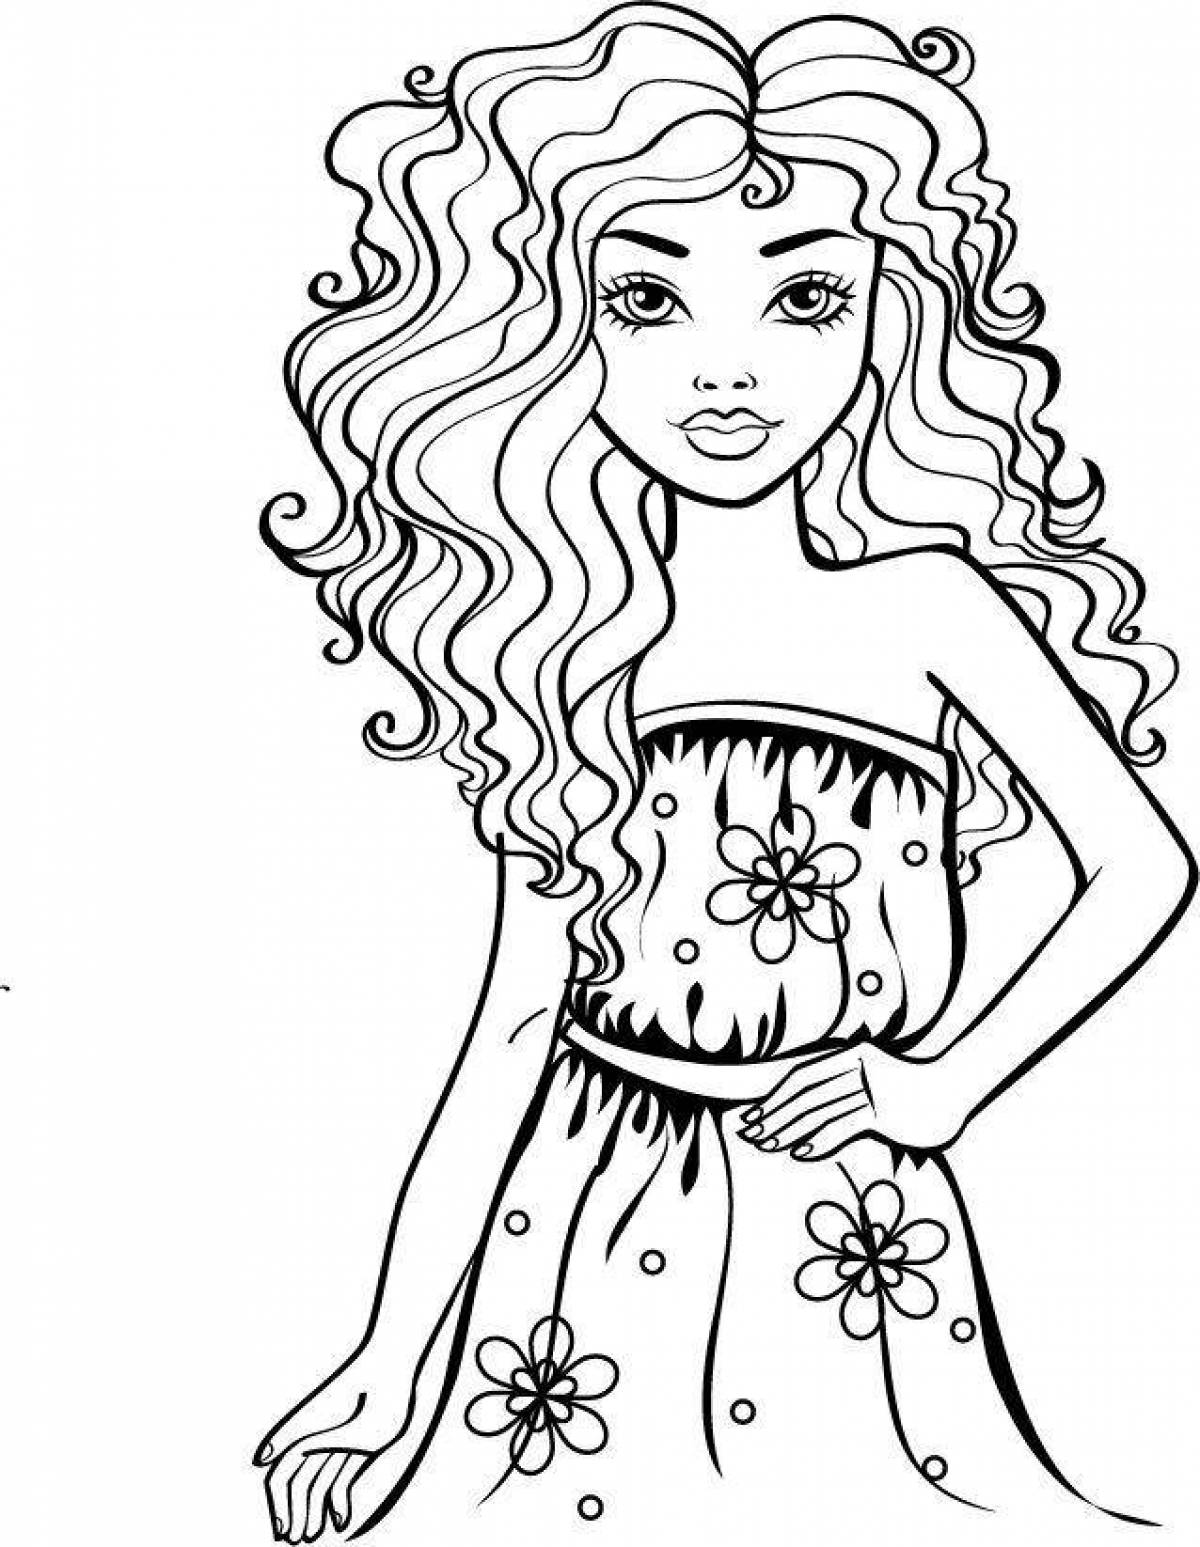 Creative coloring page model